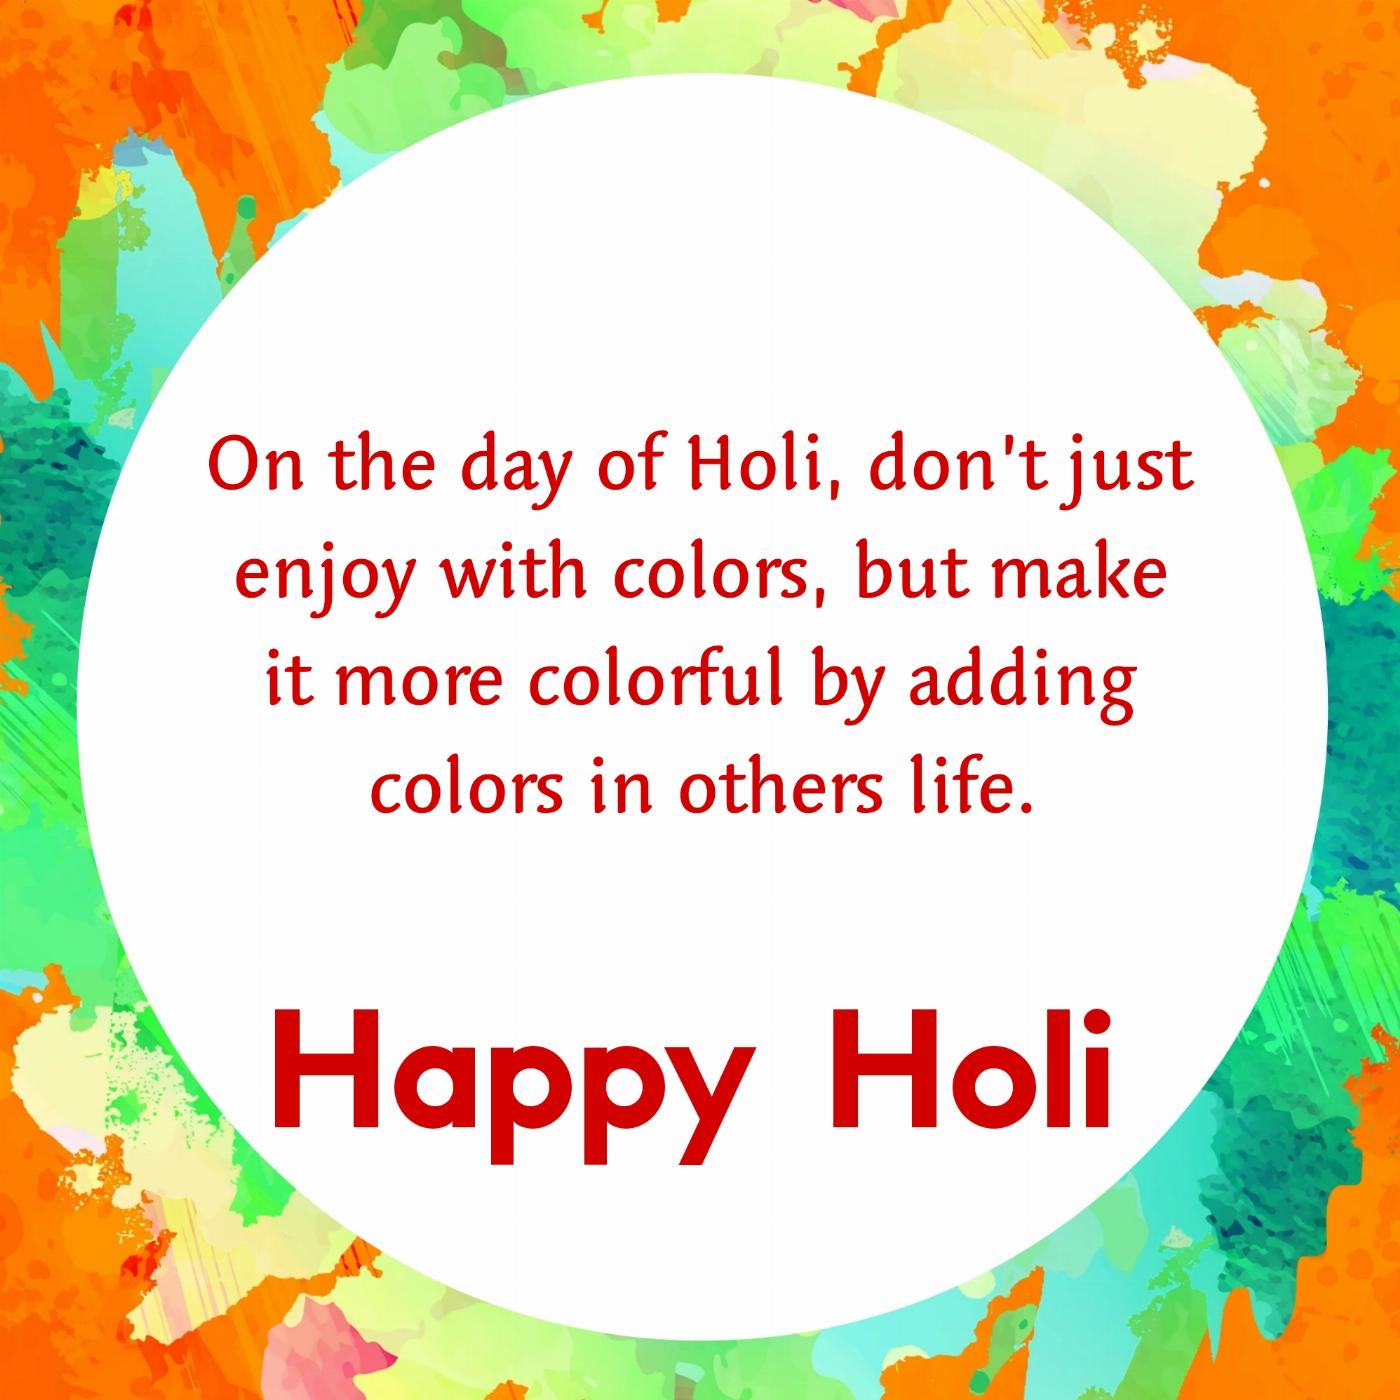 On the occasion of Holi remember to forgive everyone